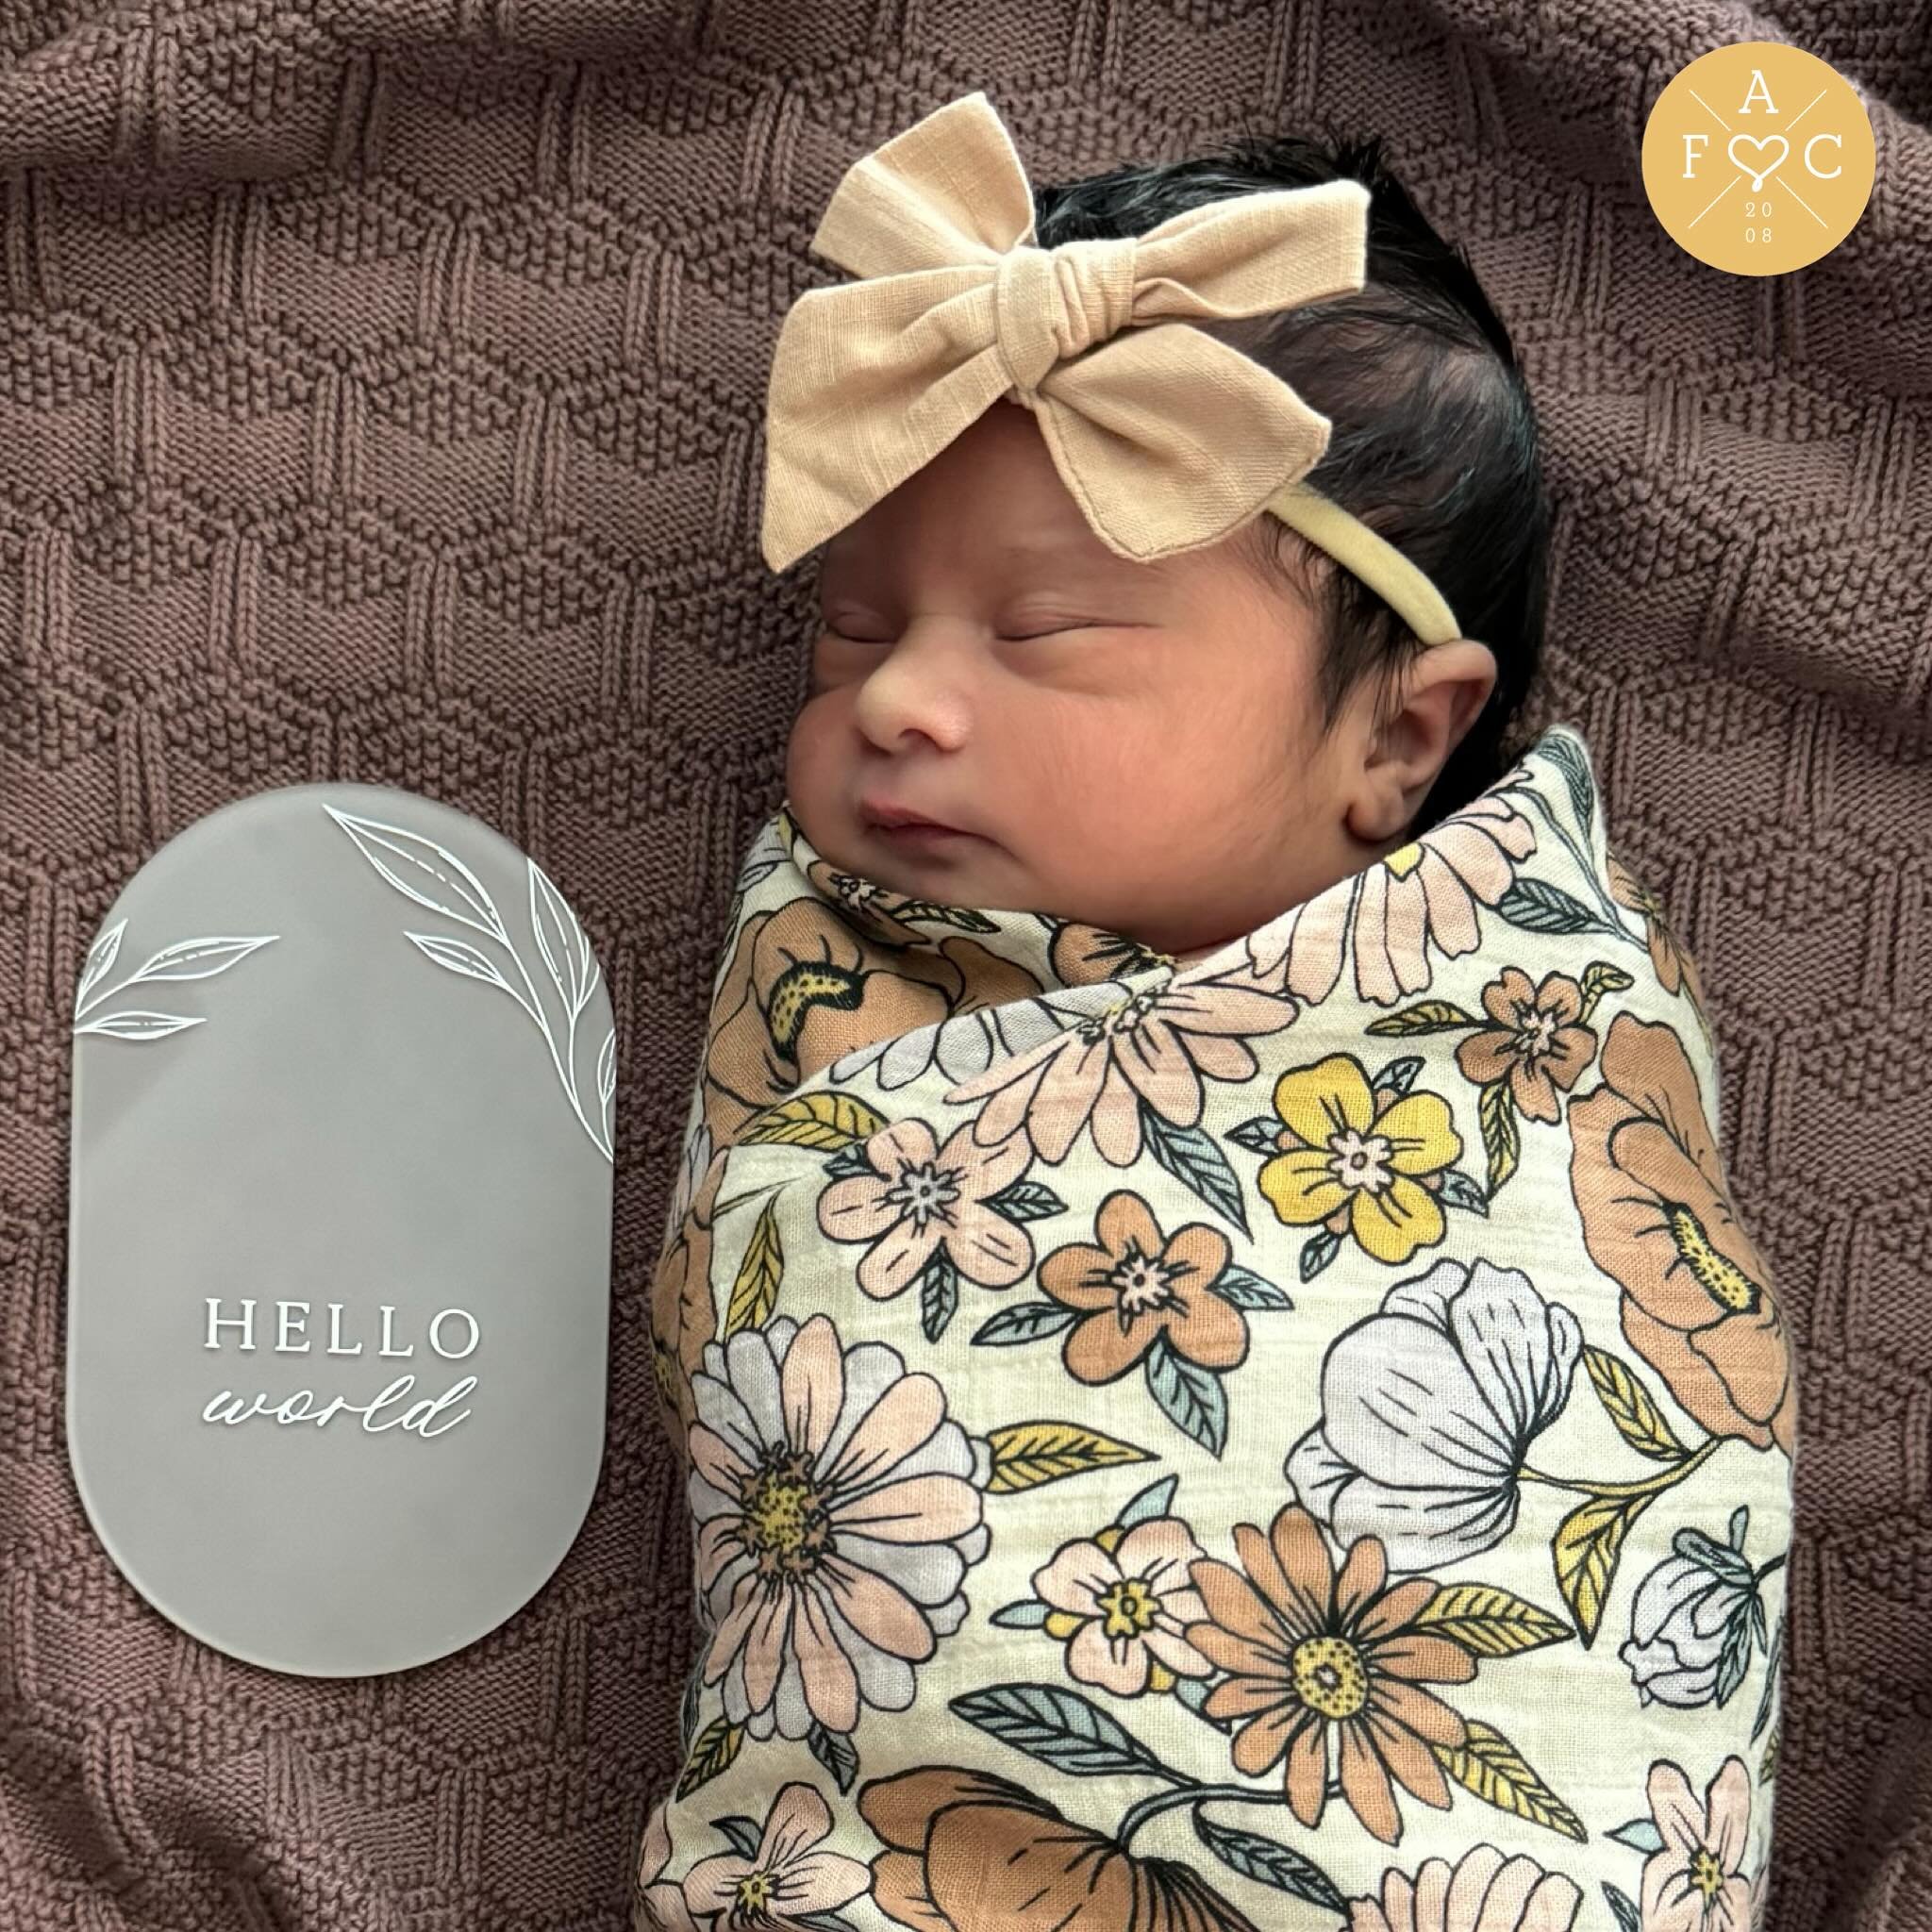 Congratulations to the &ldquo;B&rdquo; family! Meet the precious and oh so loved, Lily Stephanie! Please continue to pray for this sweet baby and family. Remember this first family as well. We are praying that God is near, bringing all the love and s